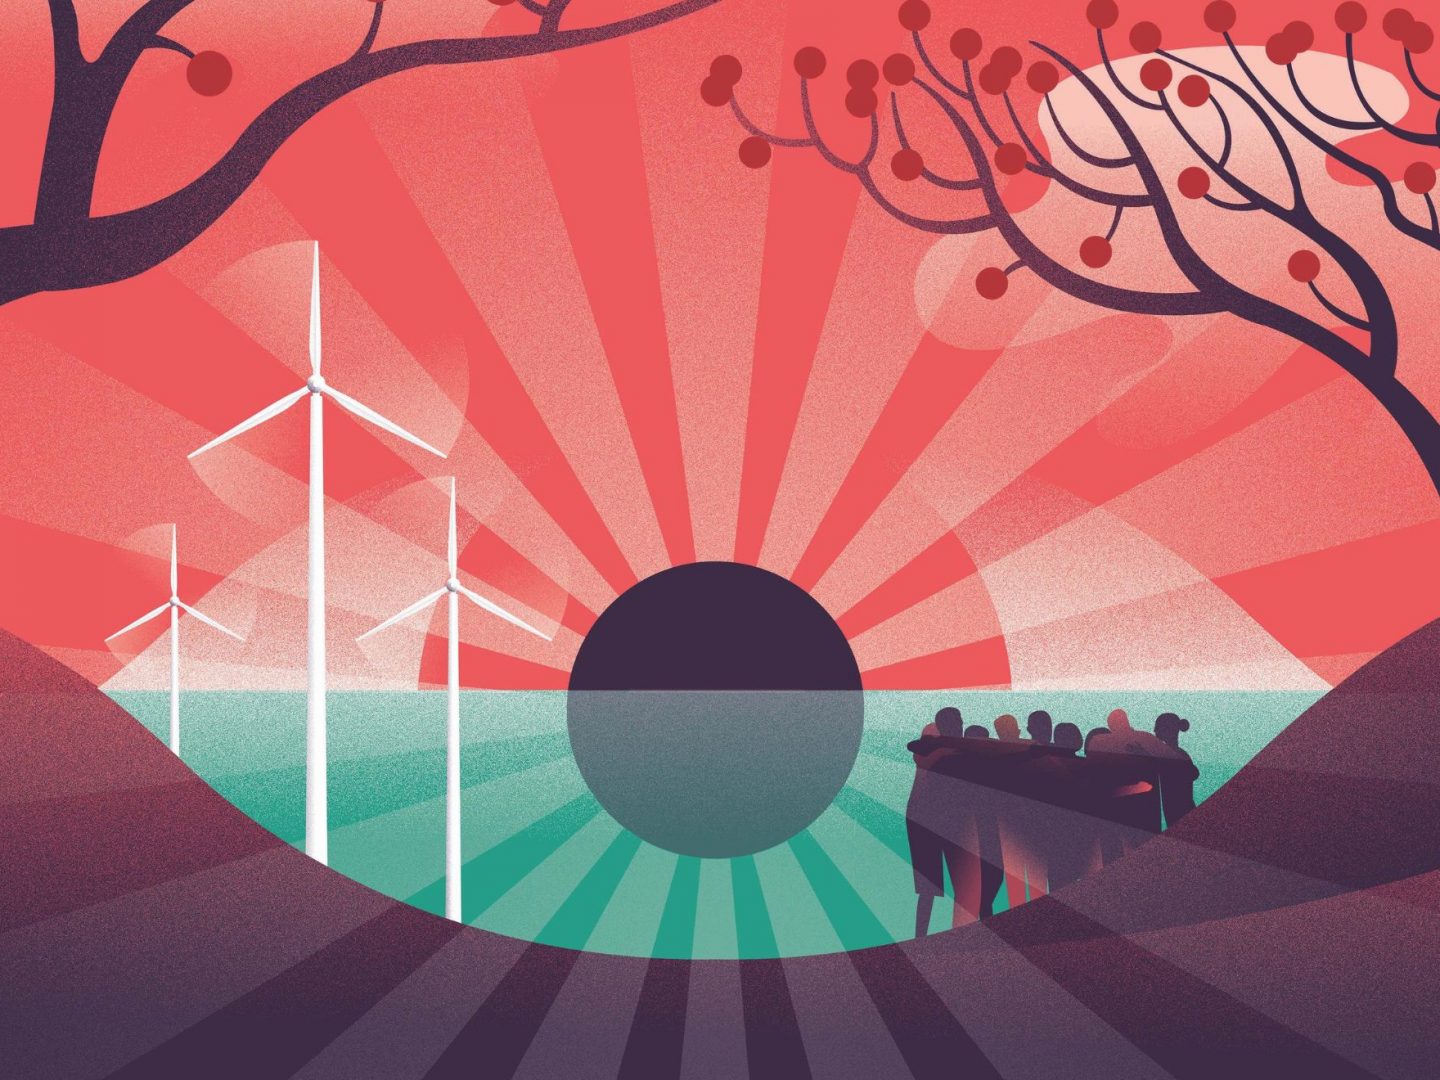 illustration shows a group of people hugging next to a design of a giant sun rising over the horizon, with trees in the background